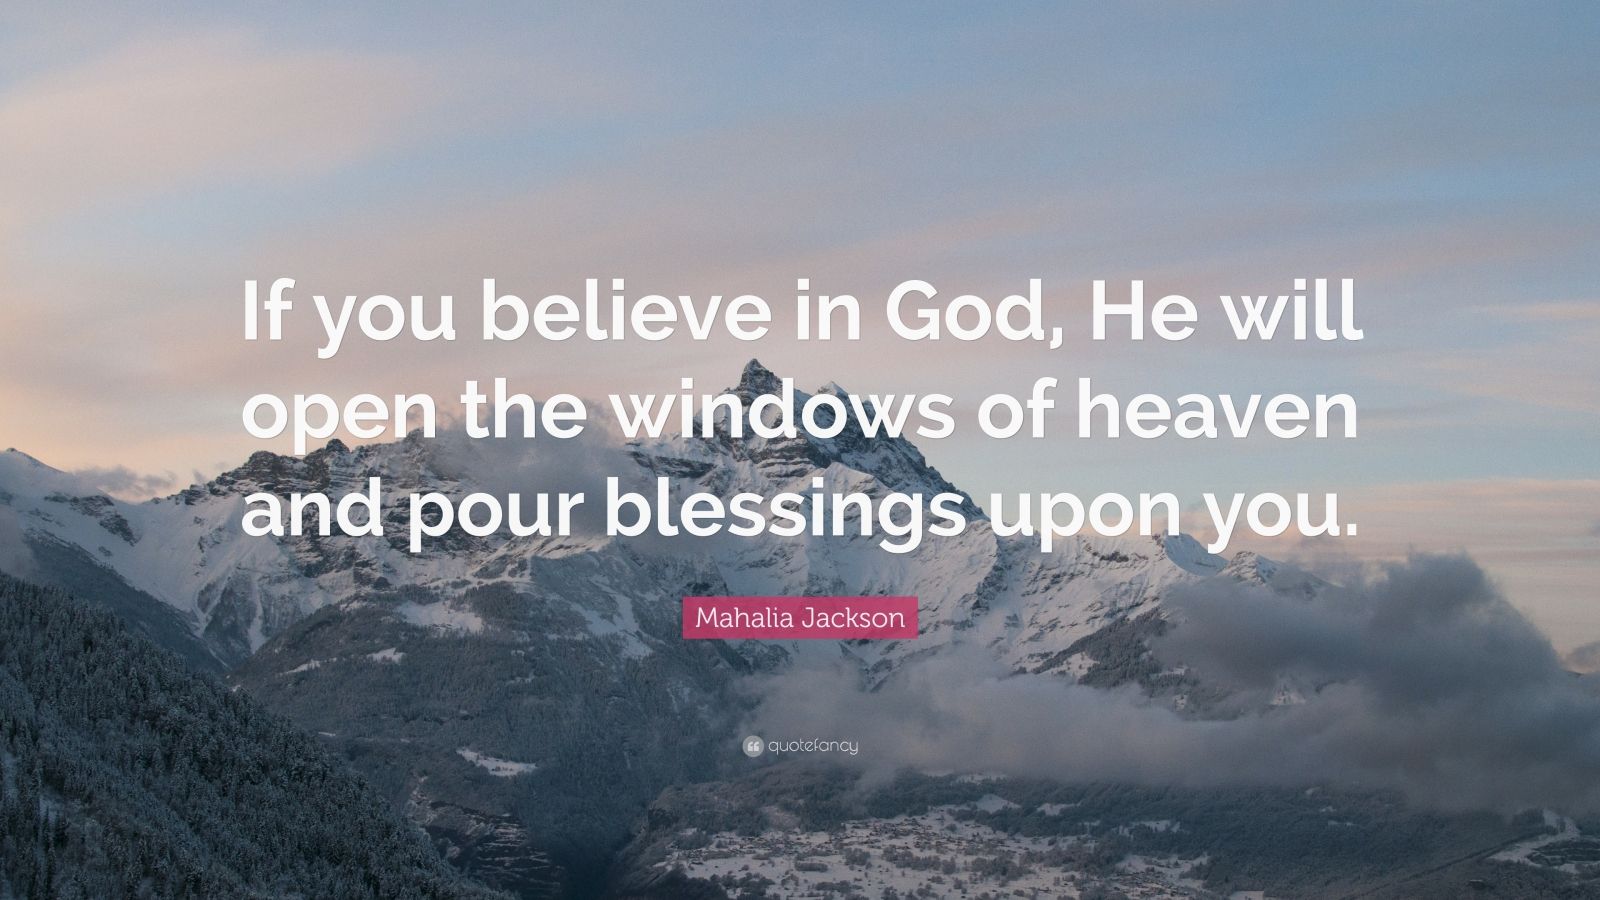 Mahalia Jackson Quote: “If you believe in God, He will open the windows ...